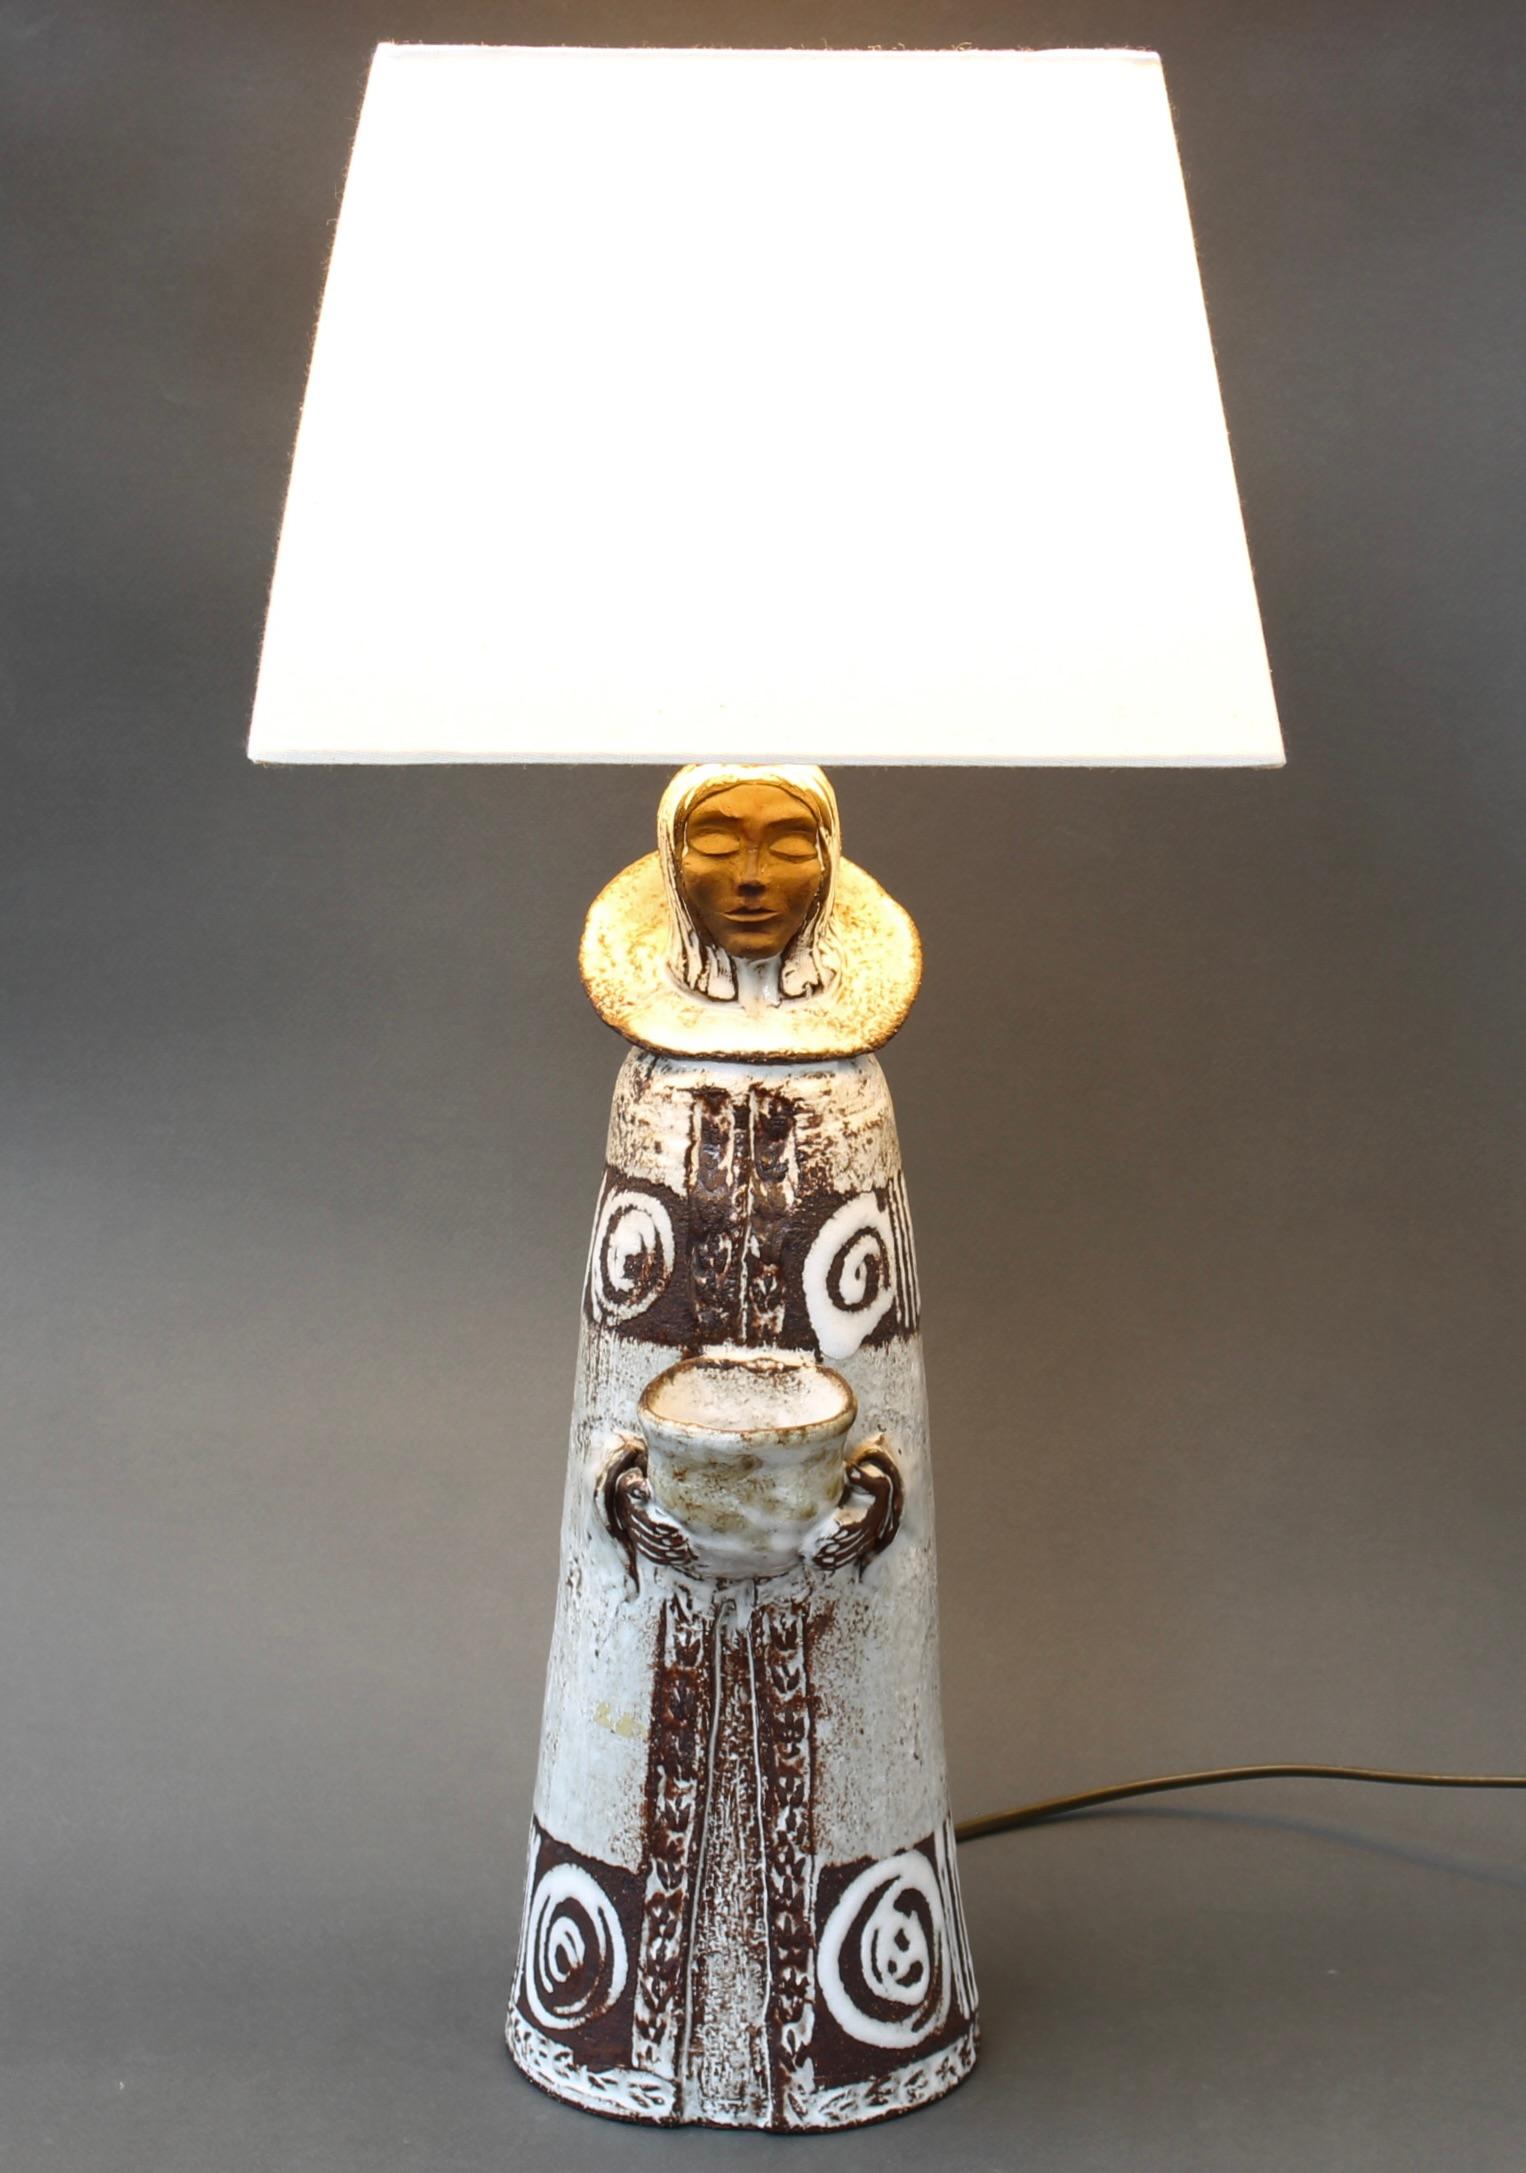 French vintage ceramic table lamp by Albert Thiry (circa 1970s). Not one of his usual subjects or motifs, ceramicist Thiry created the figure - an upright clerical - wearing an old fashioned ruff collar with hands that edge out of the robe to hold a